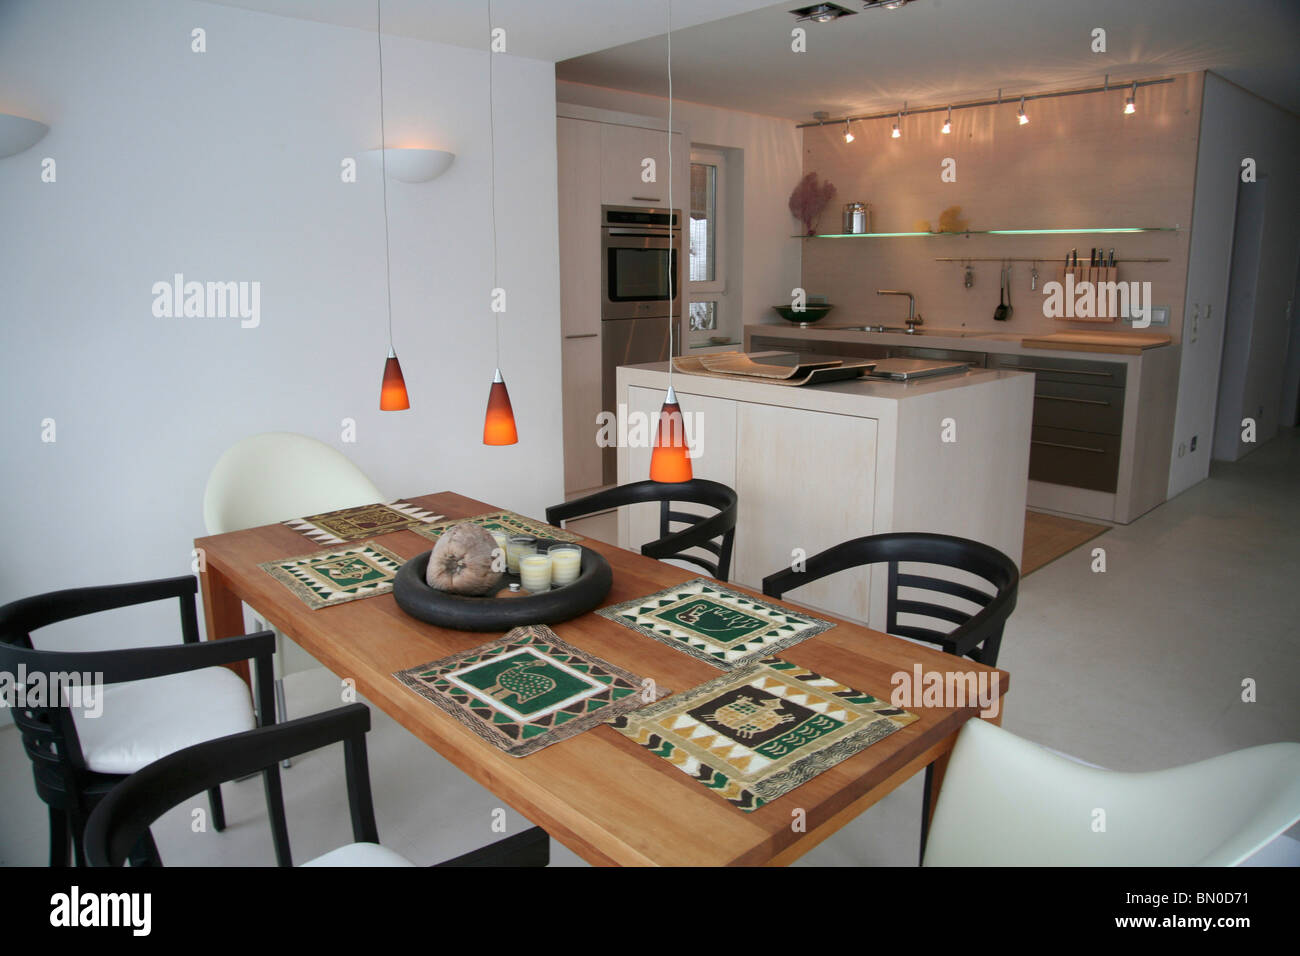 Dining Room with Dining Table, Kitchen in Background Stock Photo - Alamy